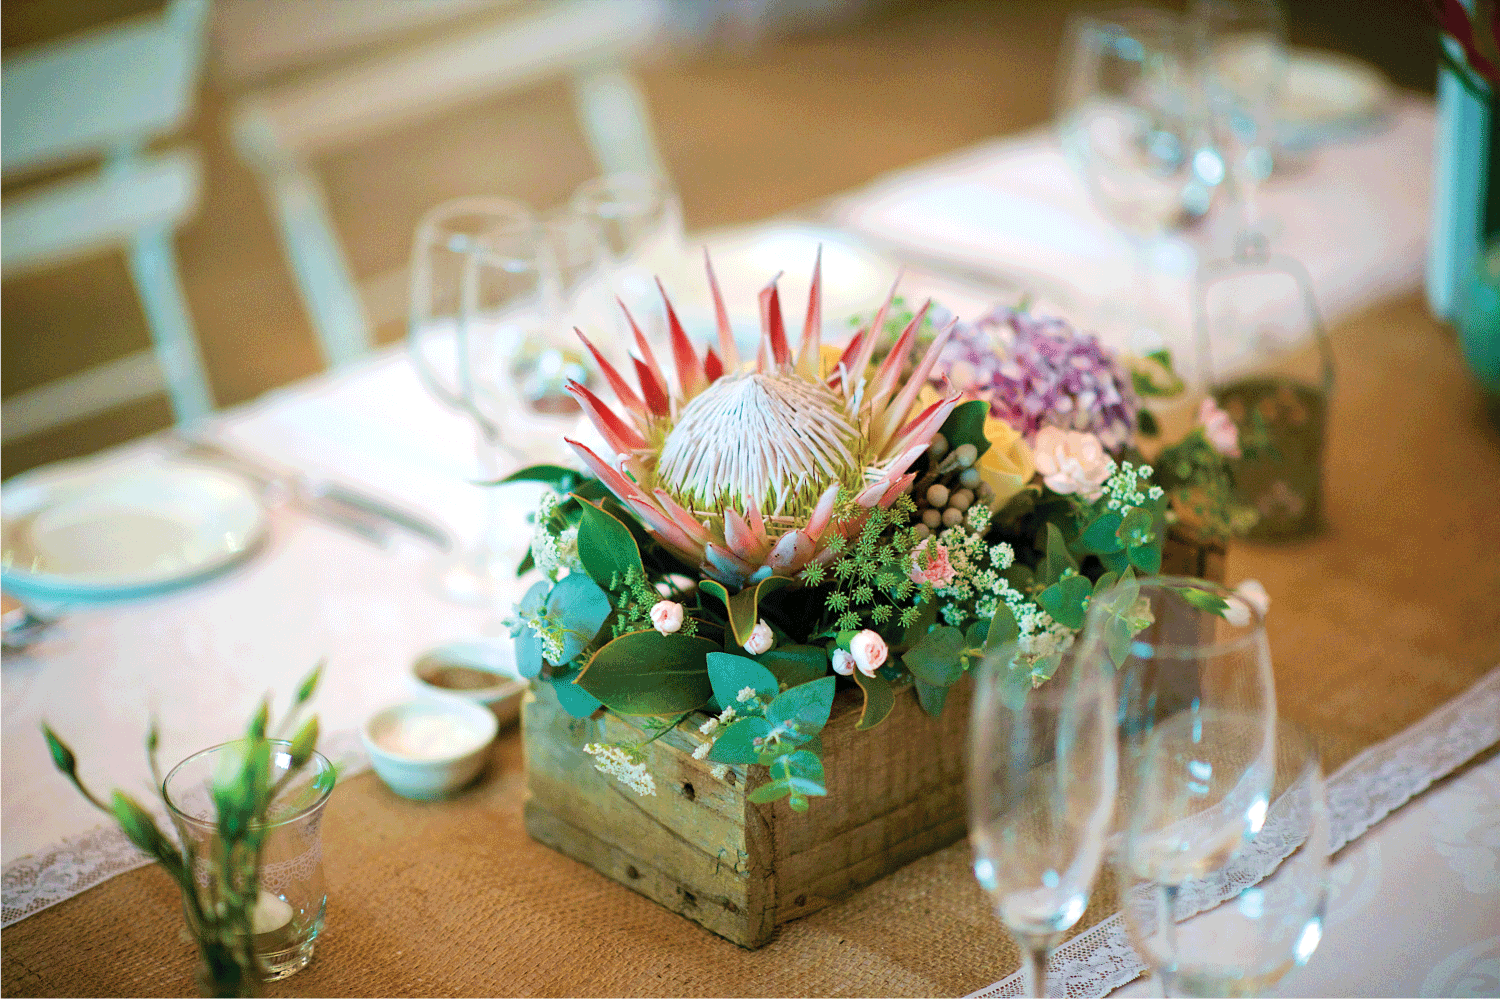 Beautiful Table Decorations at a wedding. 